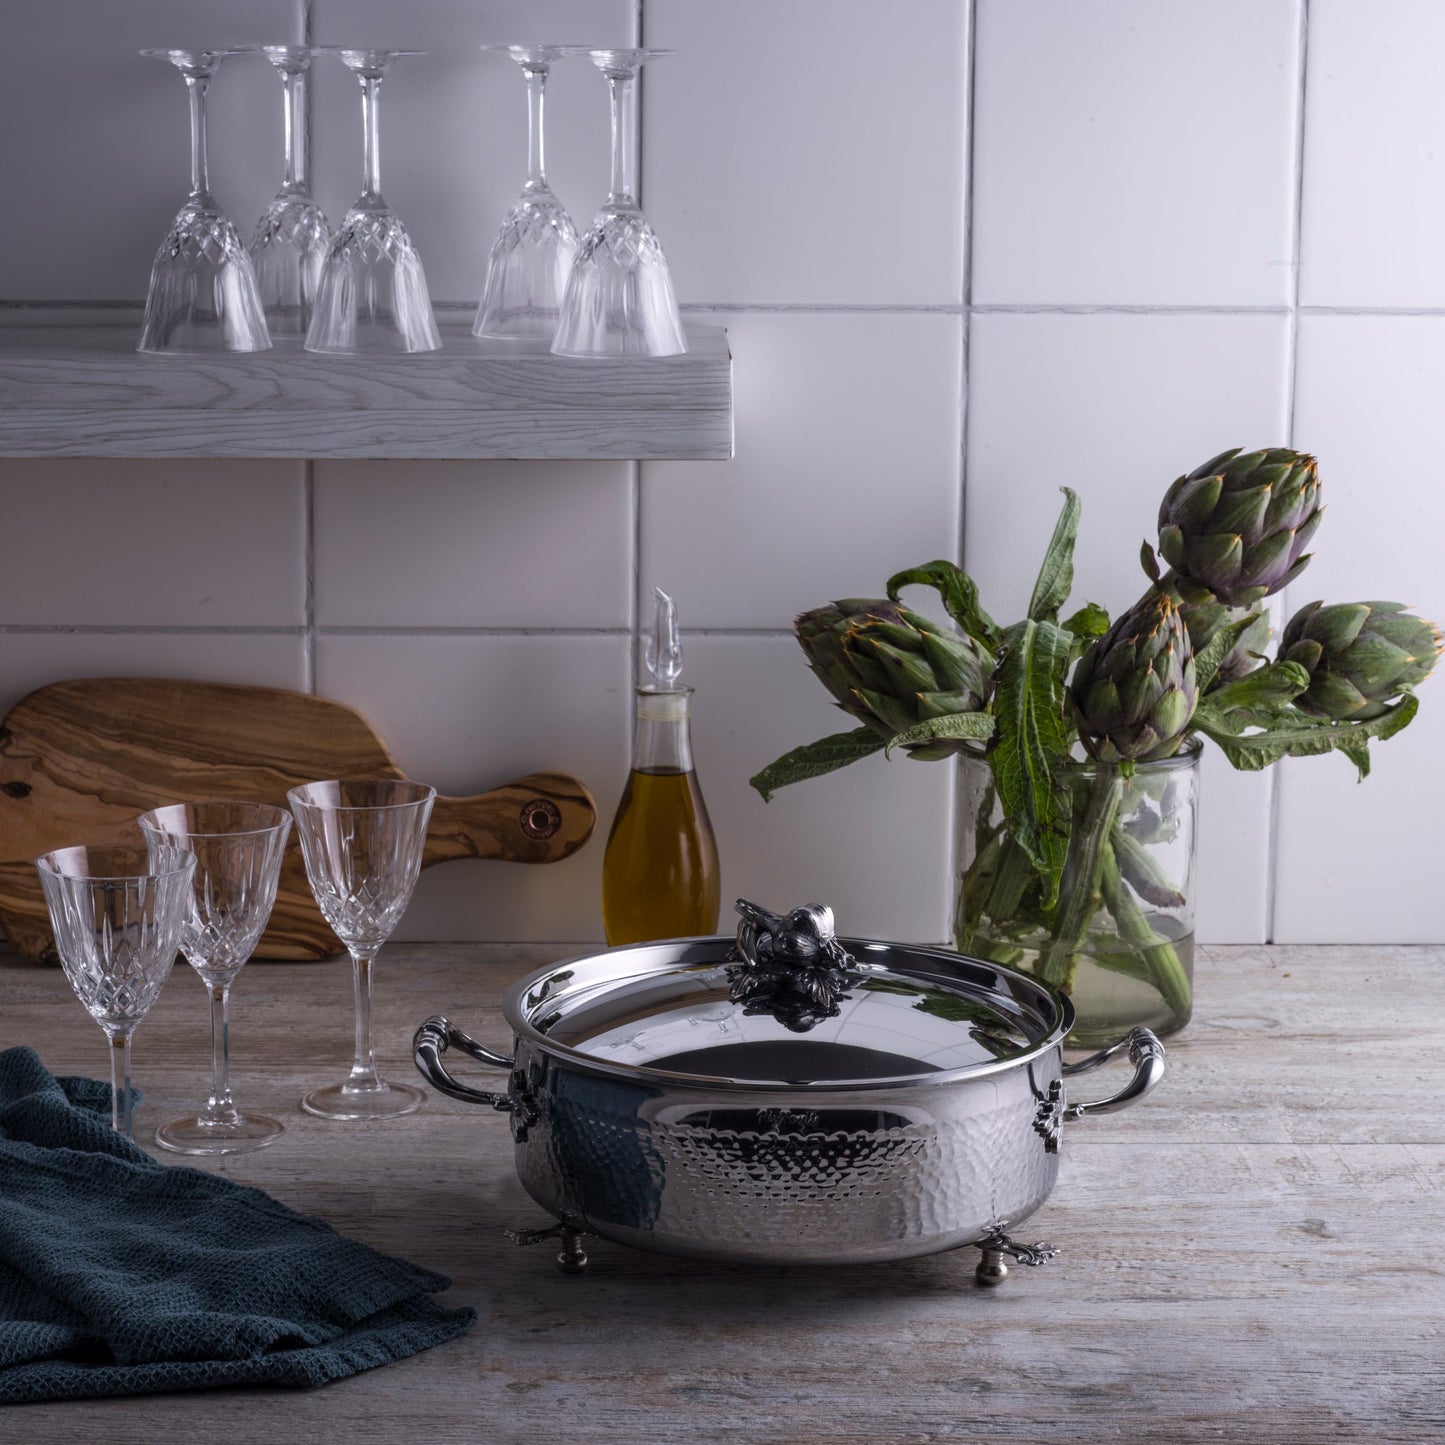 Opus Prima hammered clad stainless steel braiser with decorated silver-plated lid knob finial from Ruffoni in an Italian kitchen with glass and artichokes